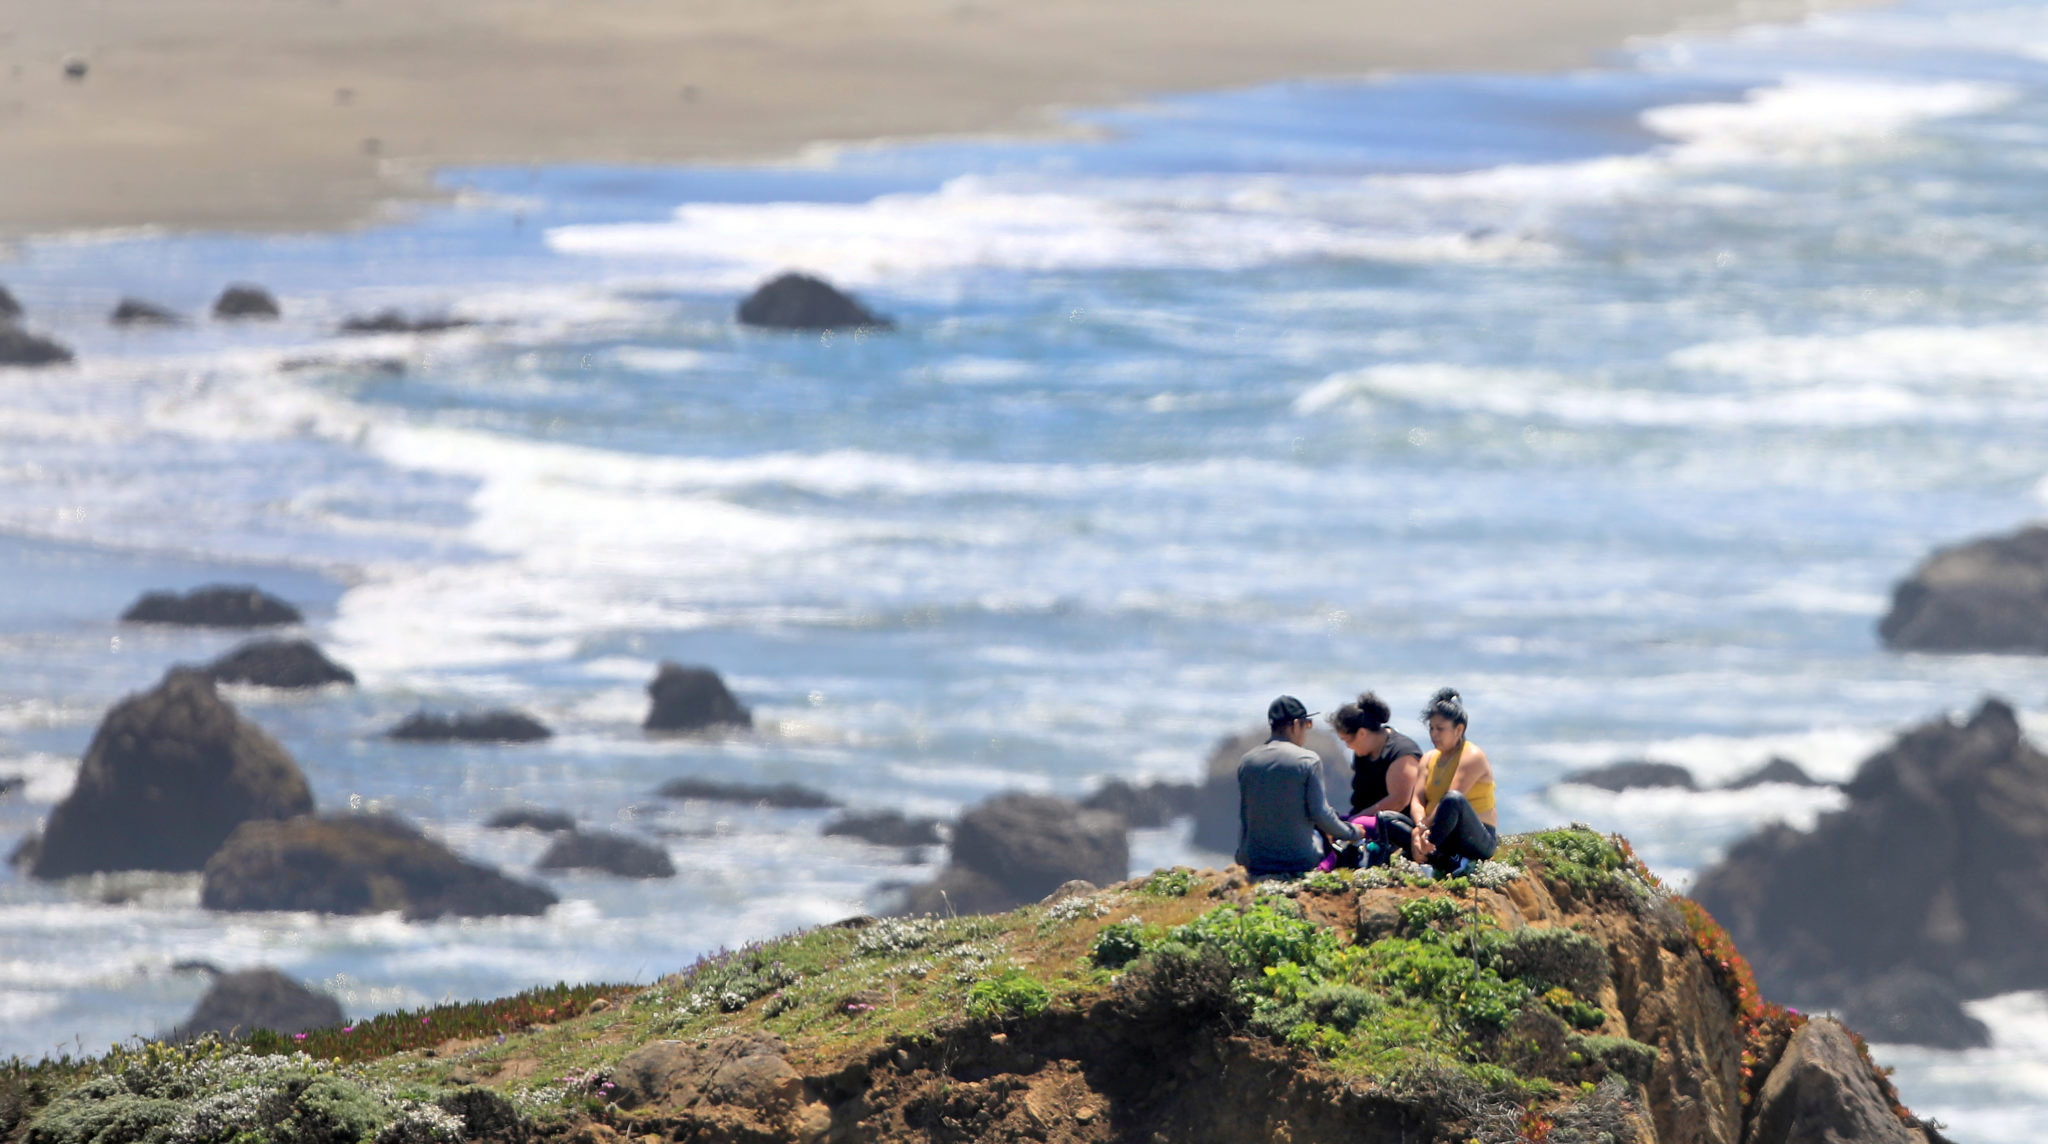 Even though the pullouts are closed along the Sonoma Coast State Beach, a group takes in some vitamin D at Coleman Beach, Tuesday, May 19, 2020. Minutes later a State Parks ranger asked them to leave, which the did.(Kent Porter / The Press Democrat) 2020